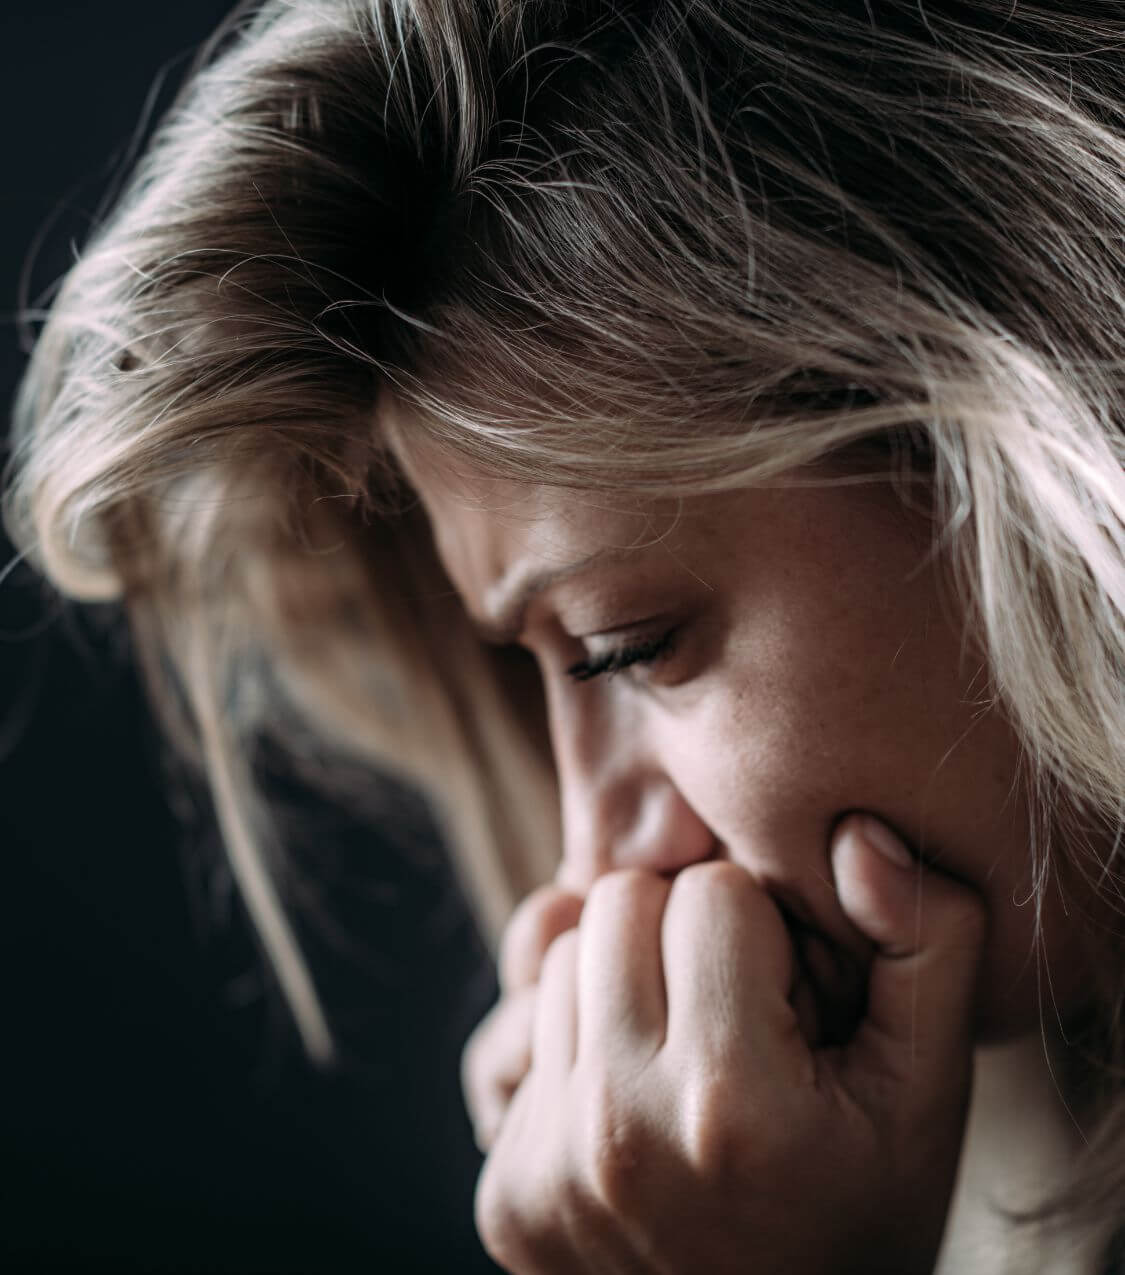 Image of an upset woman covering her mouth with her hands and looking down. Are you suffering from infidelity PTSD? Discover how a skilled therapist can help your relationship with infidelity recovery in Miami, FL!